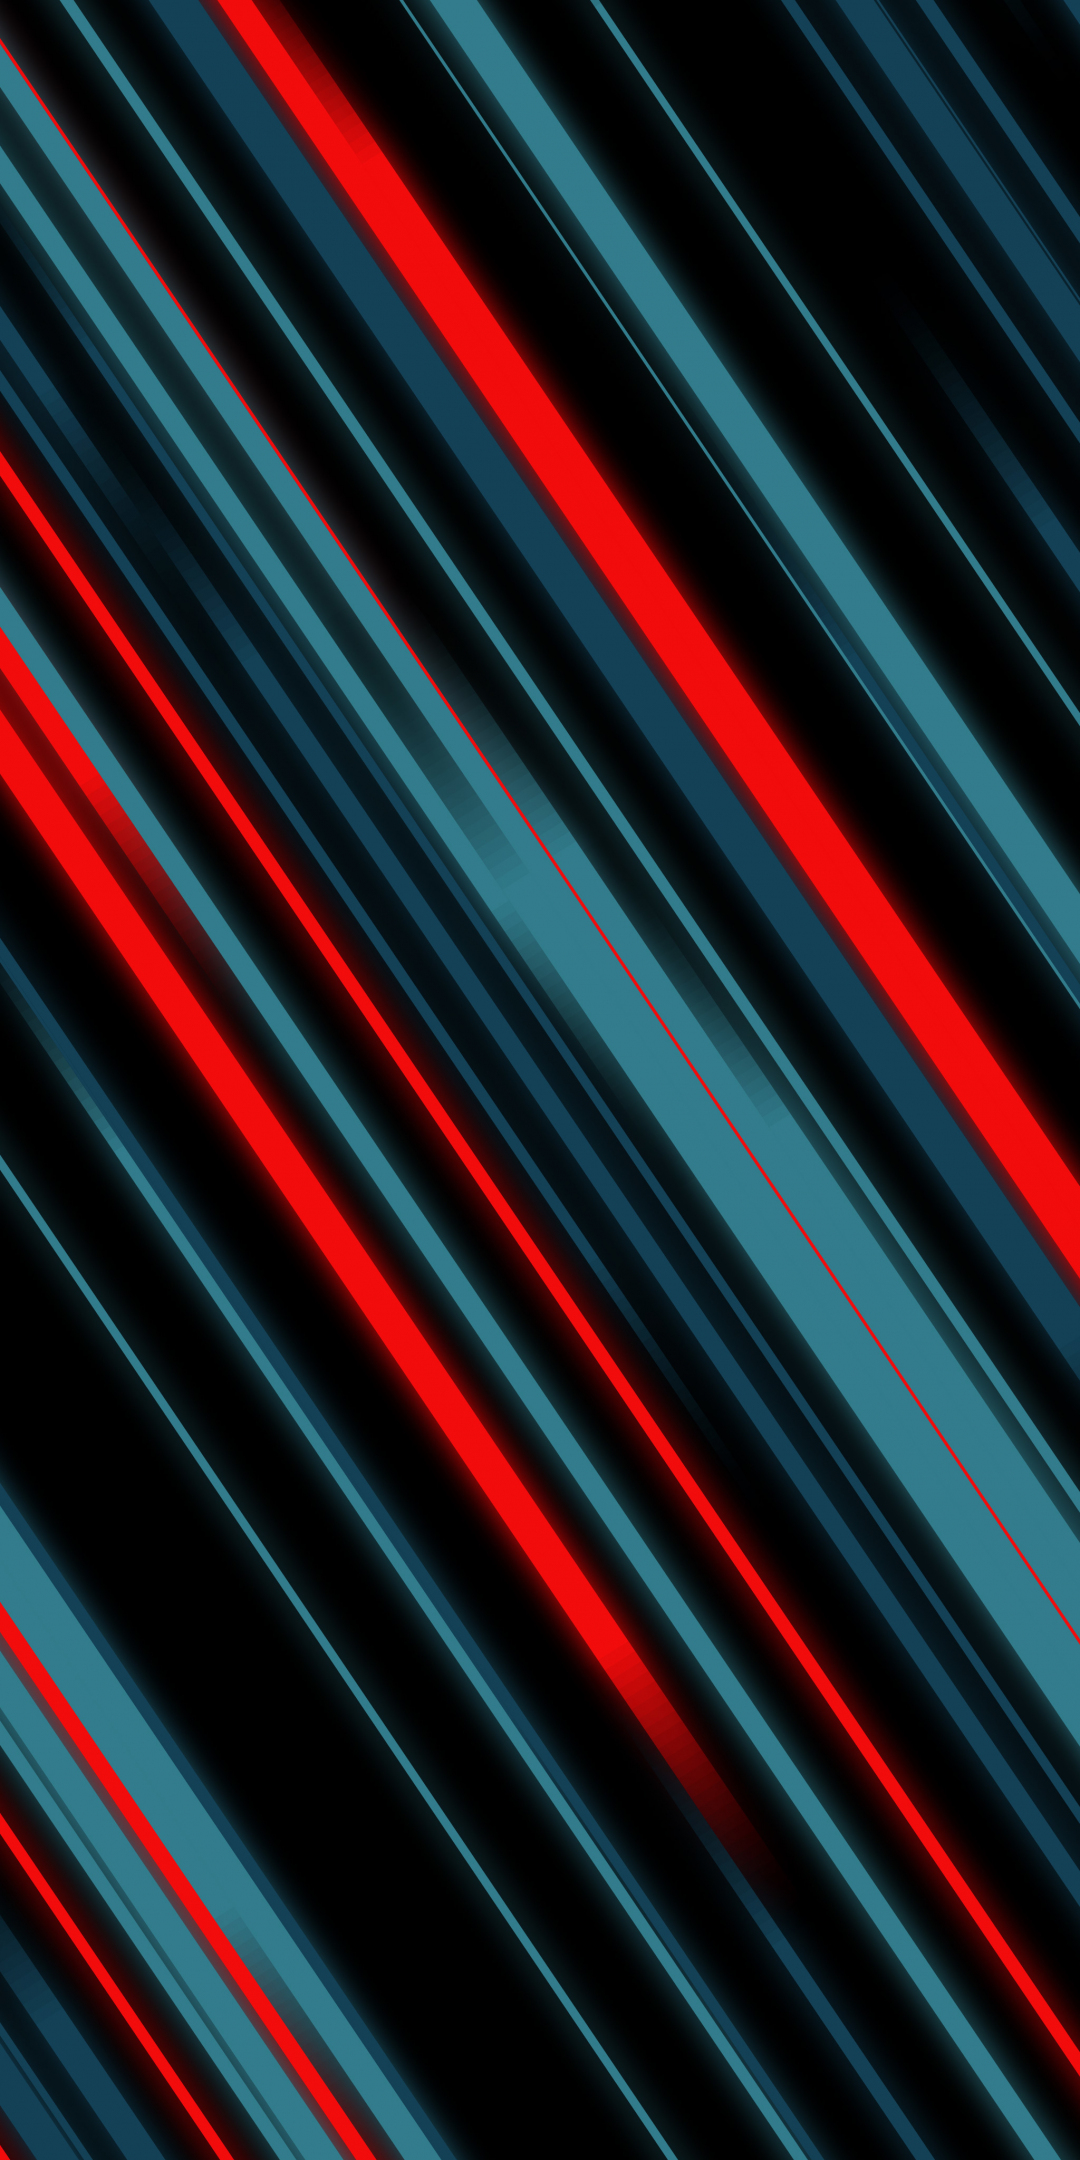 Material, style, lines, red and dark, abstract, 1080x2160 wallpaper